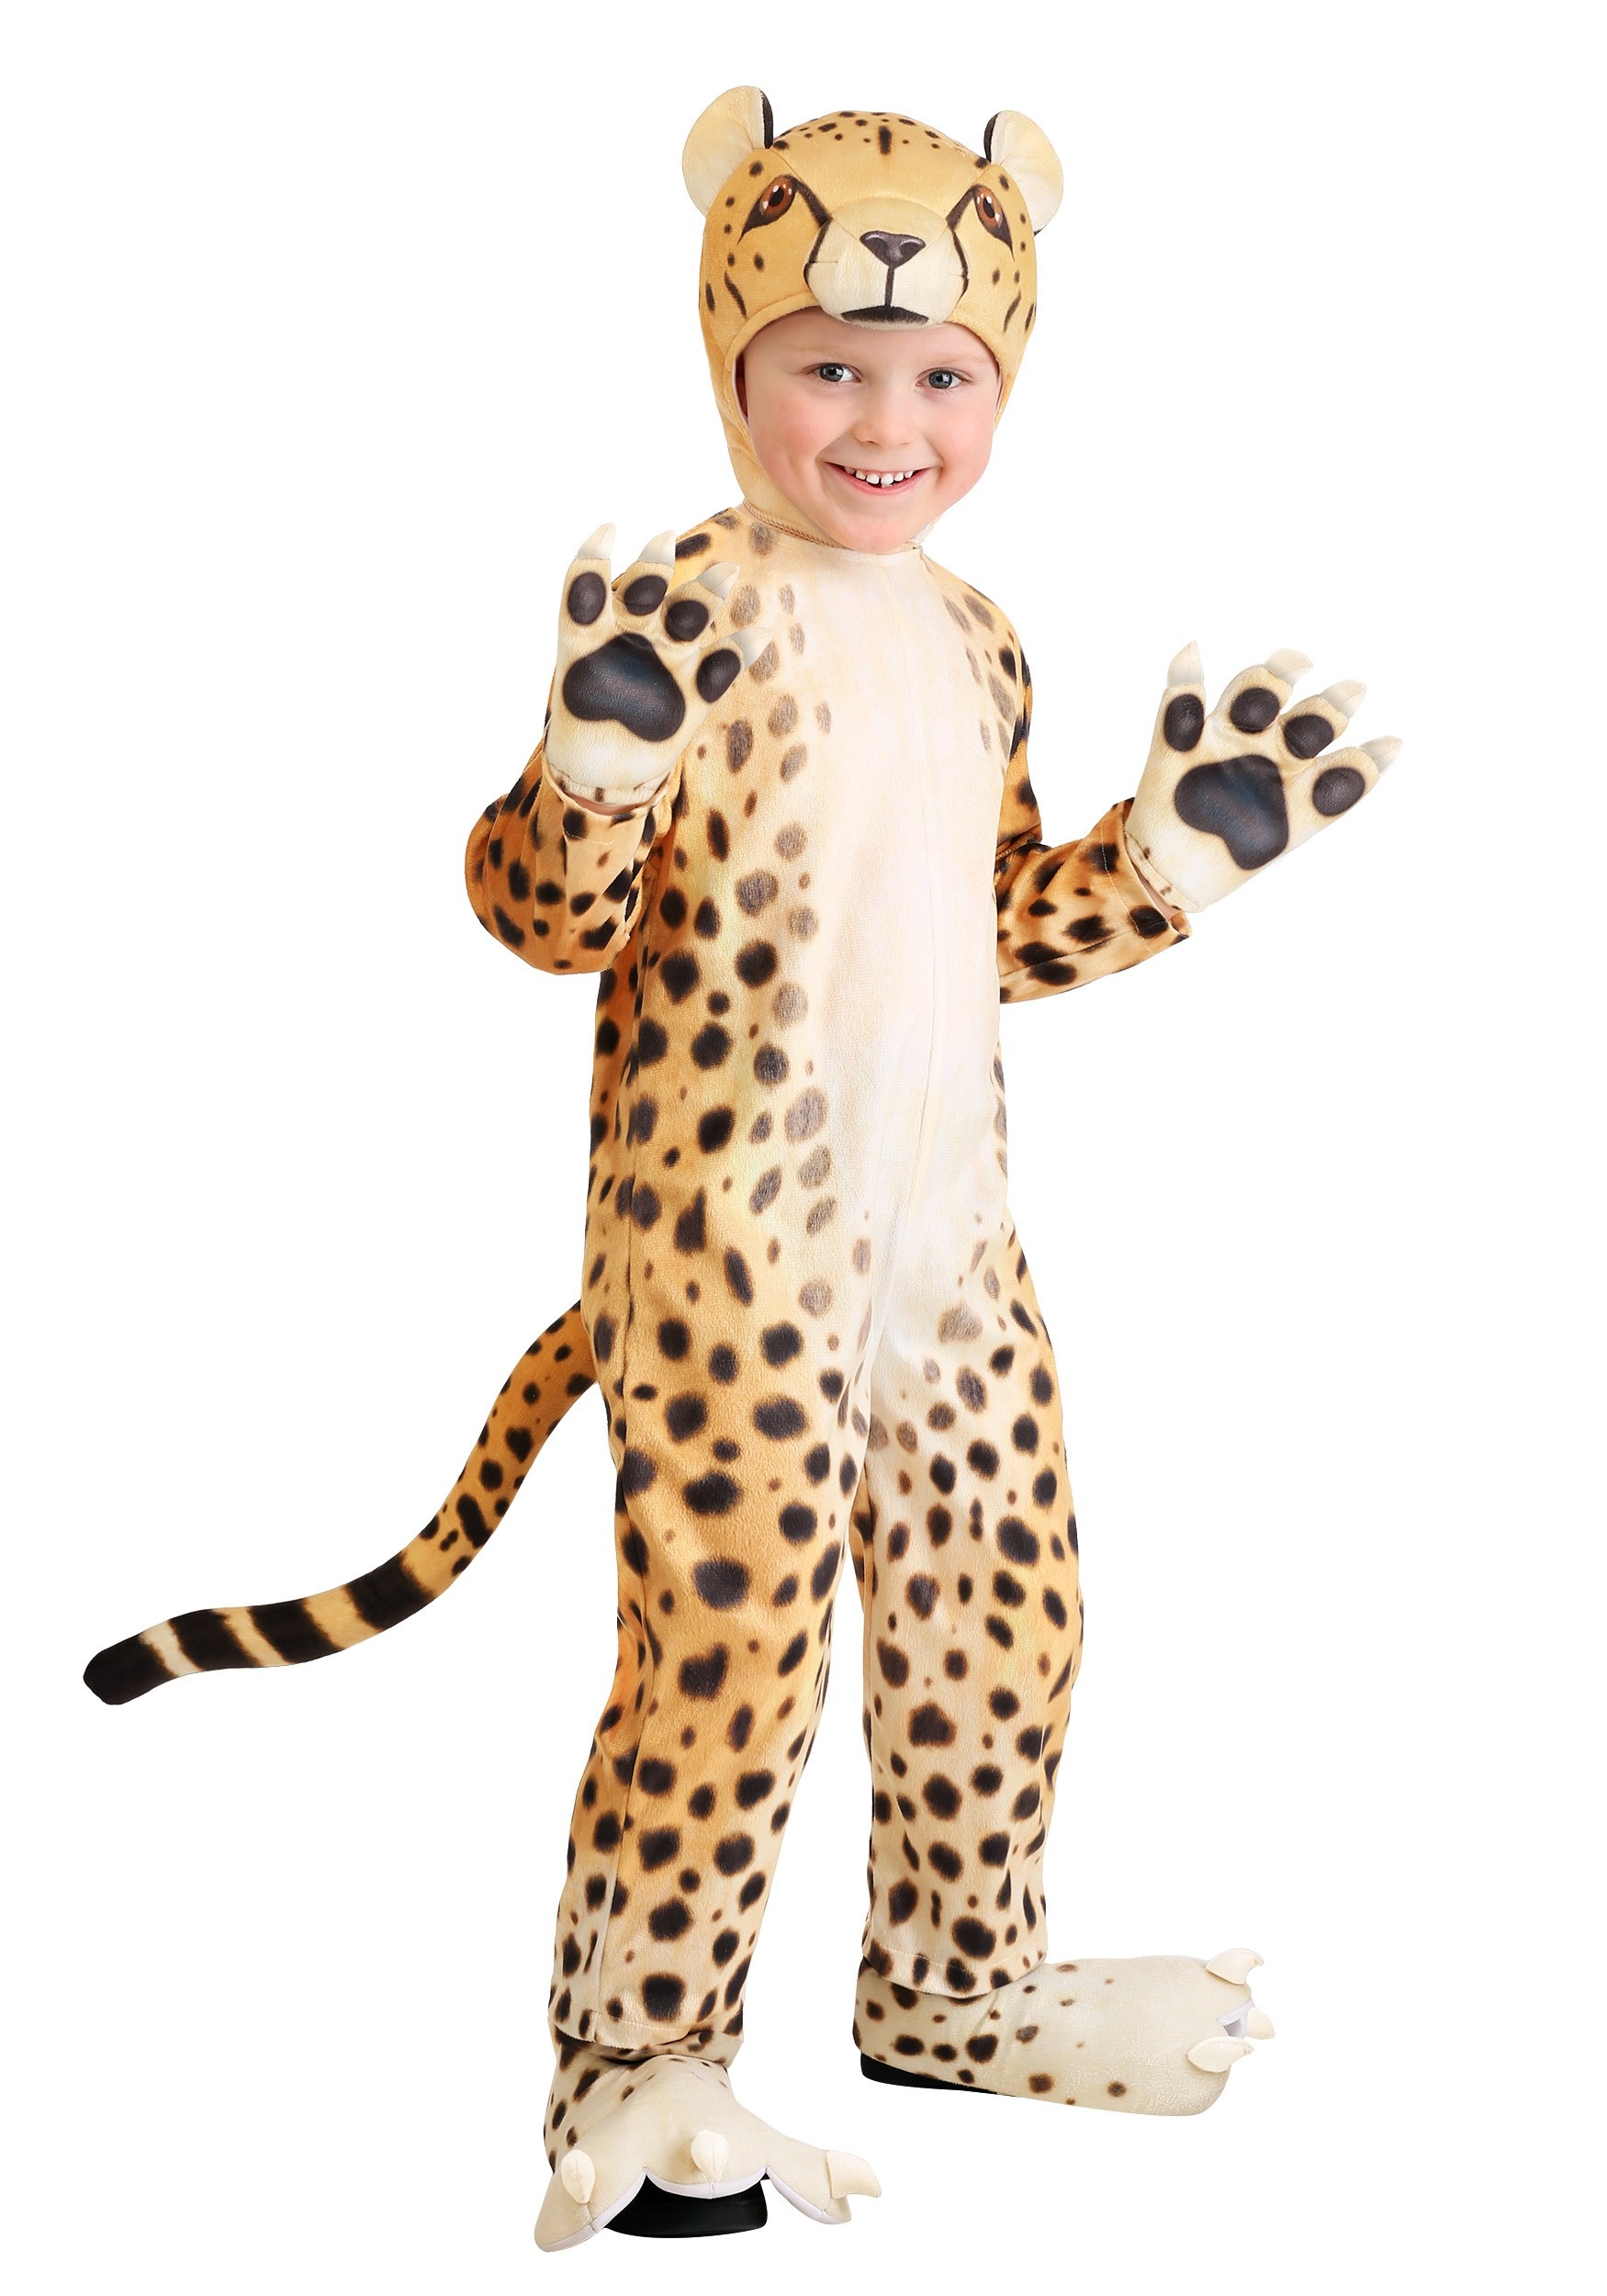 Photos - Fancy Dress Cheetah FUN Costumes Cheerful  Costume for Toddlers | Wild Cat Costumes Bla 